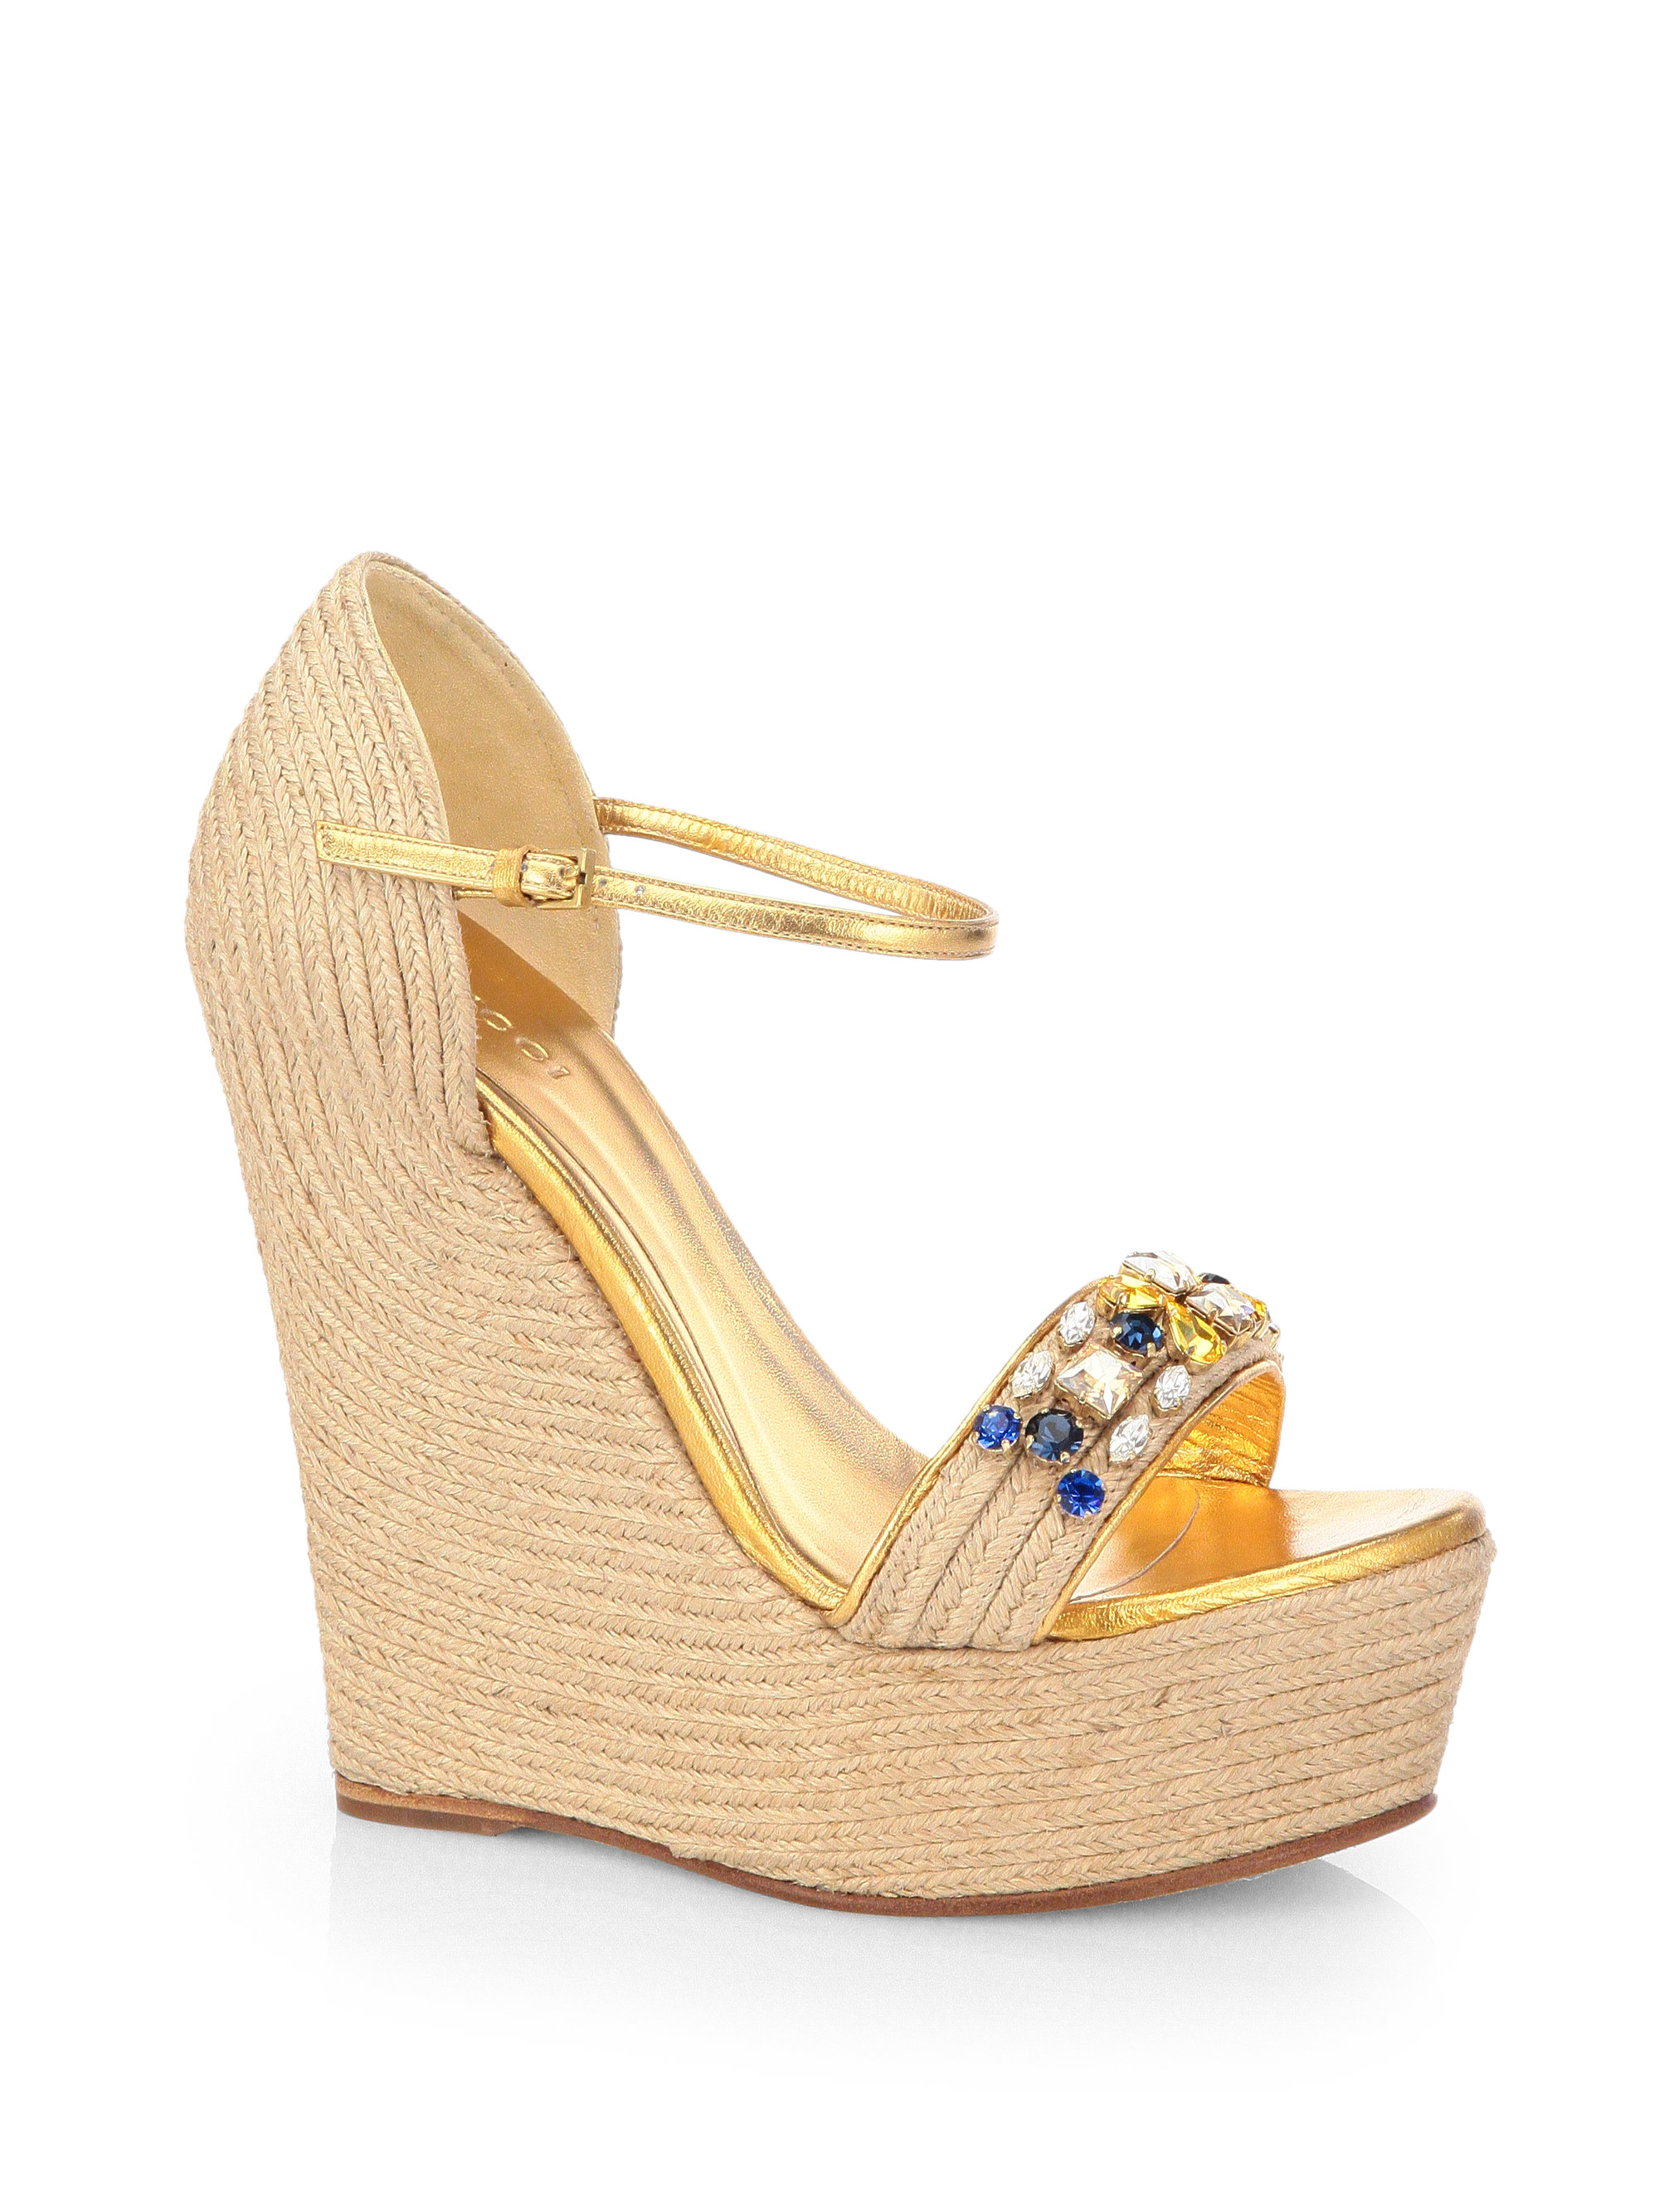 Gucci Jeweled Espadrille Wedge Sandals in Beige (NATURAL GOLD) | Lyst